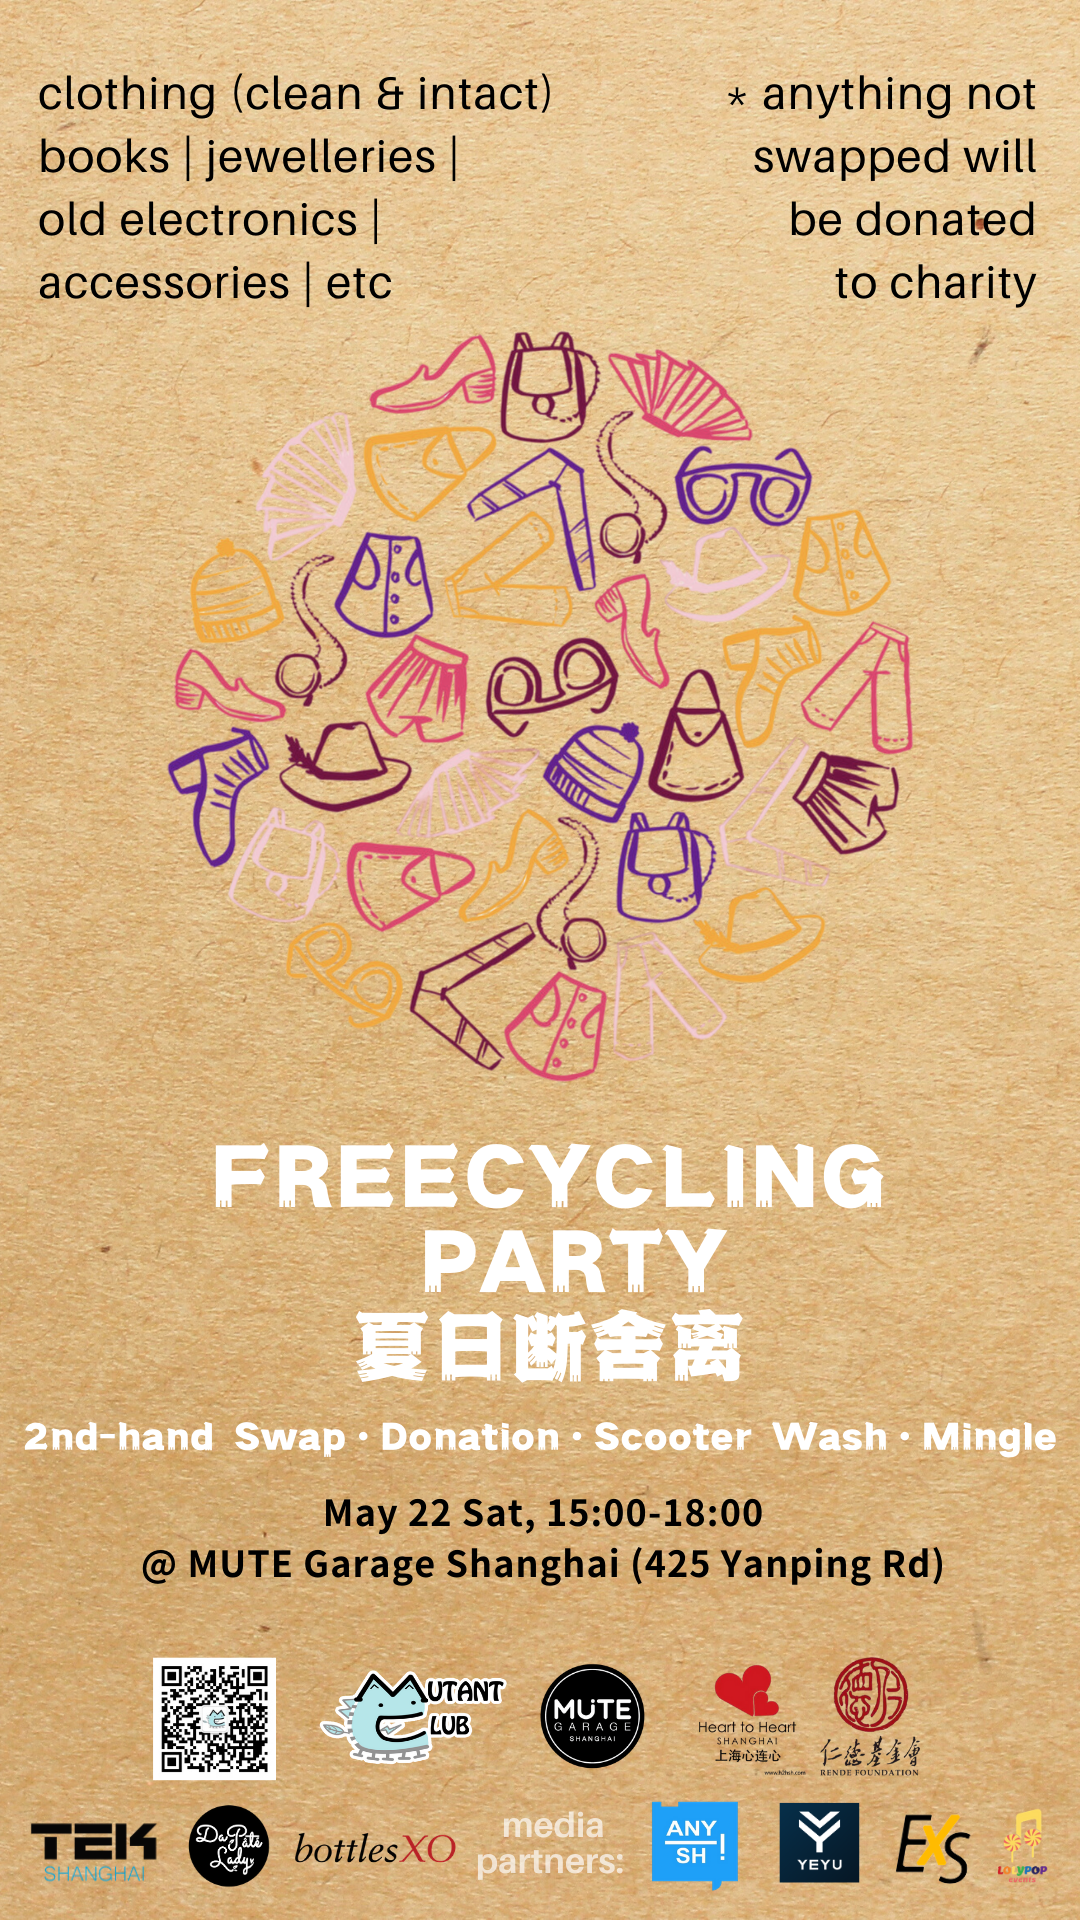 Free cycling party |Shanghai Events